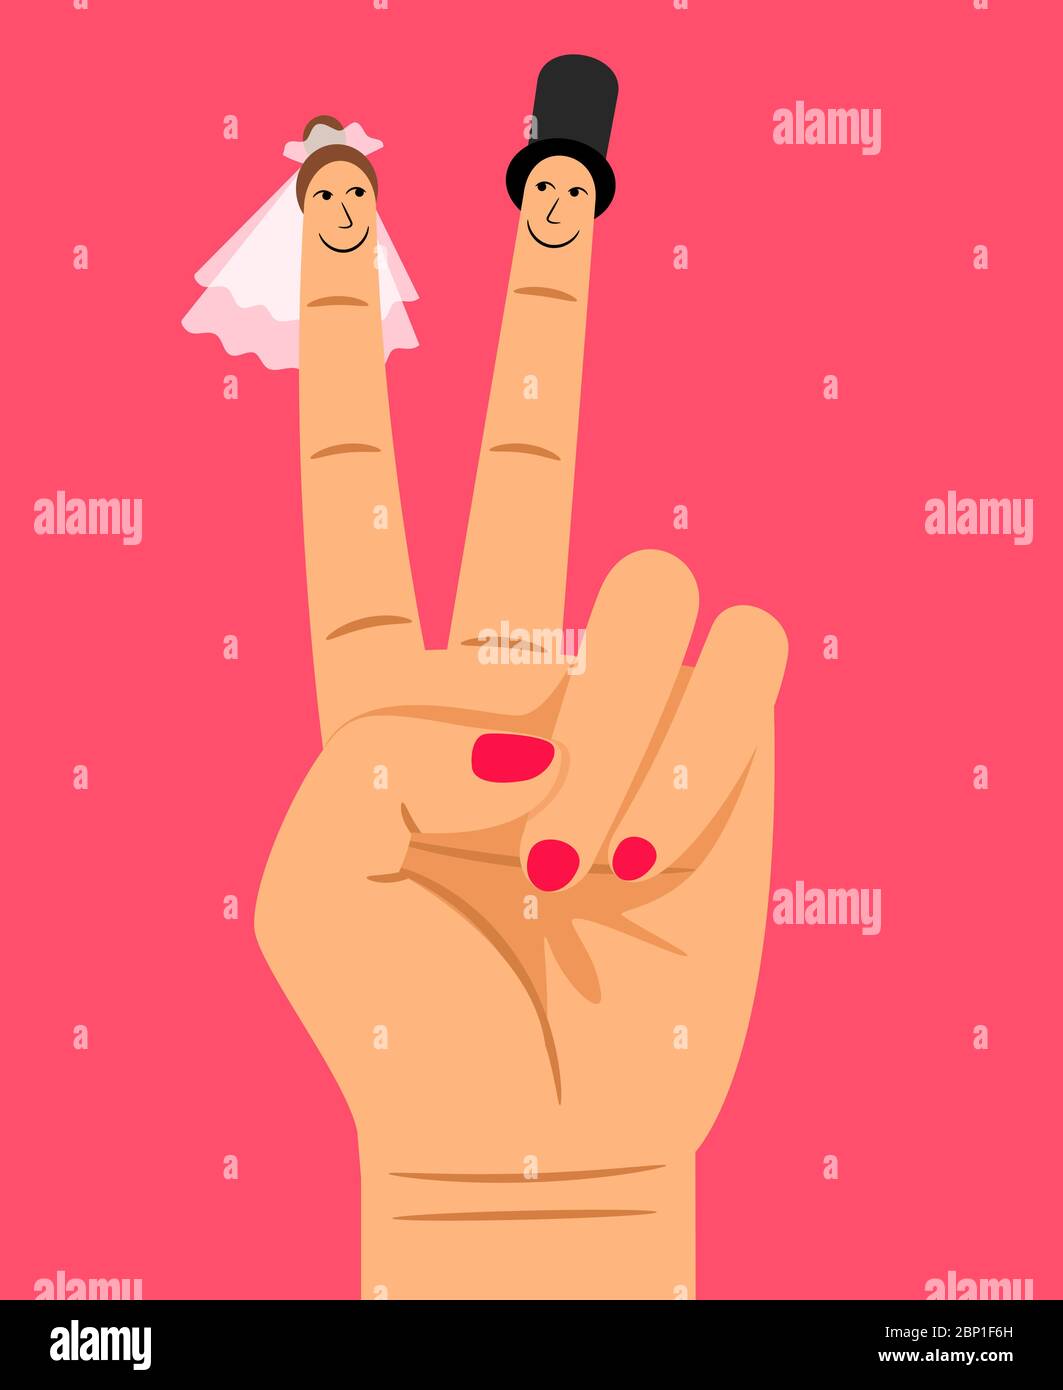 Finger puppets of bride and groom on woman hand, vector illustration Stock Vector